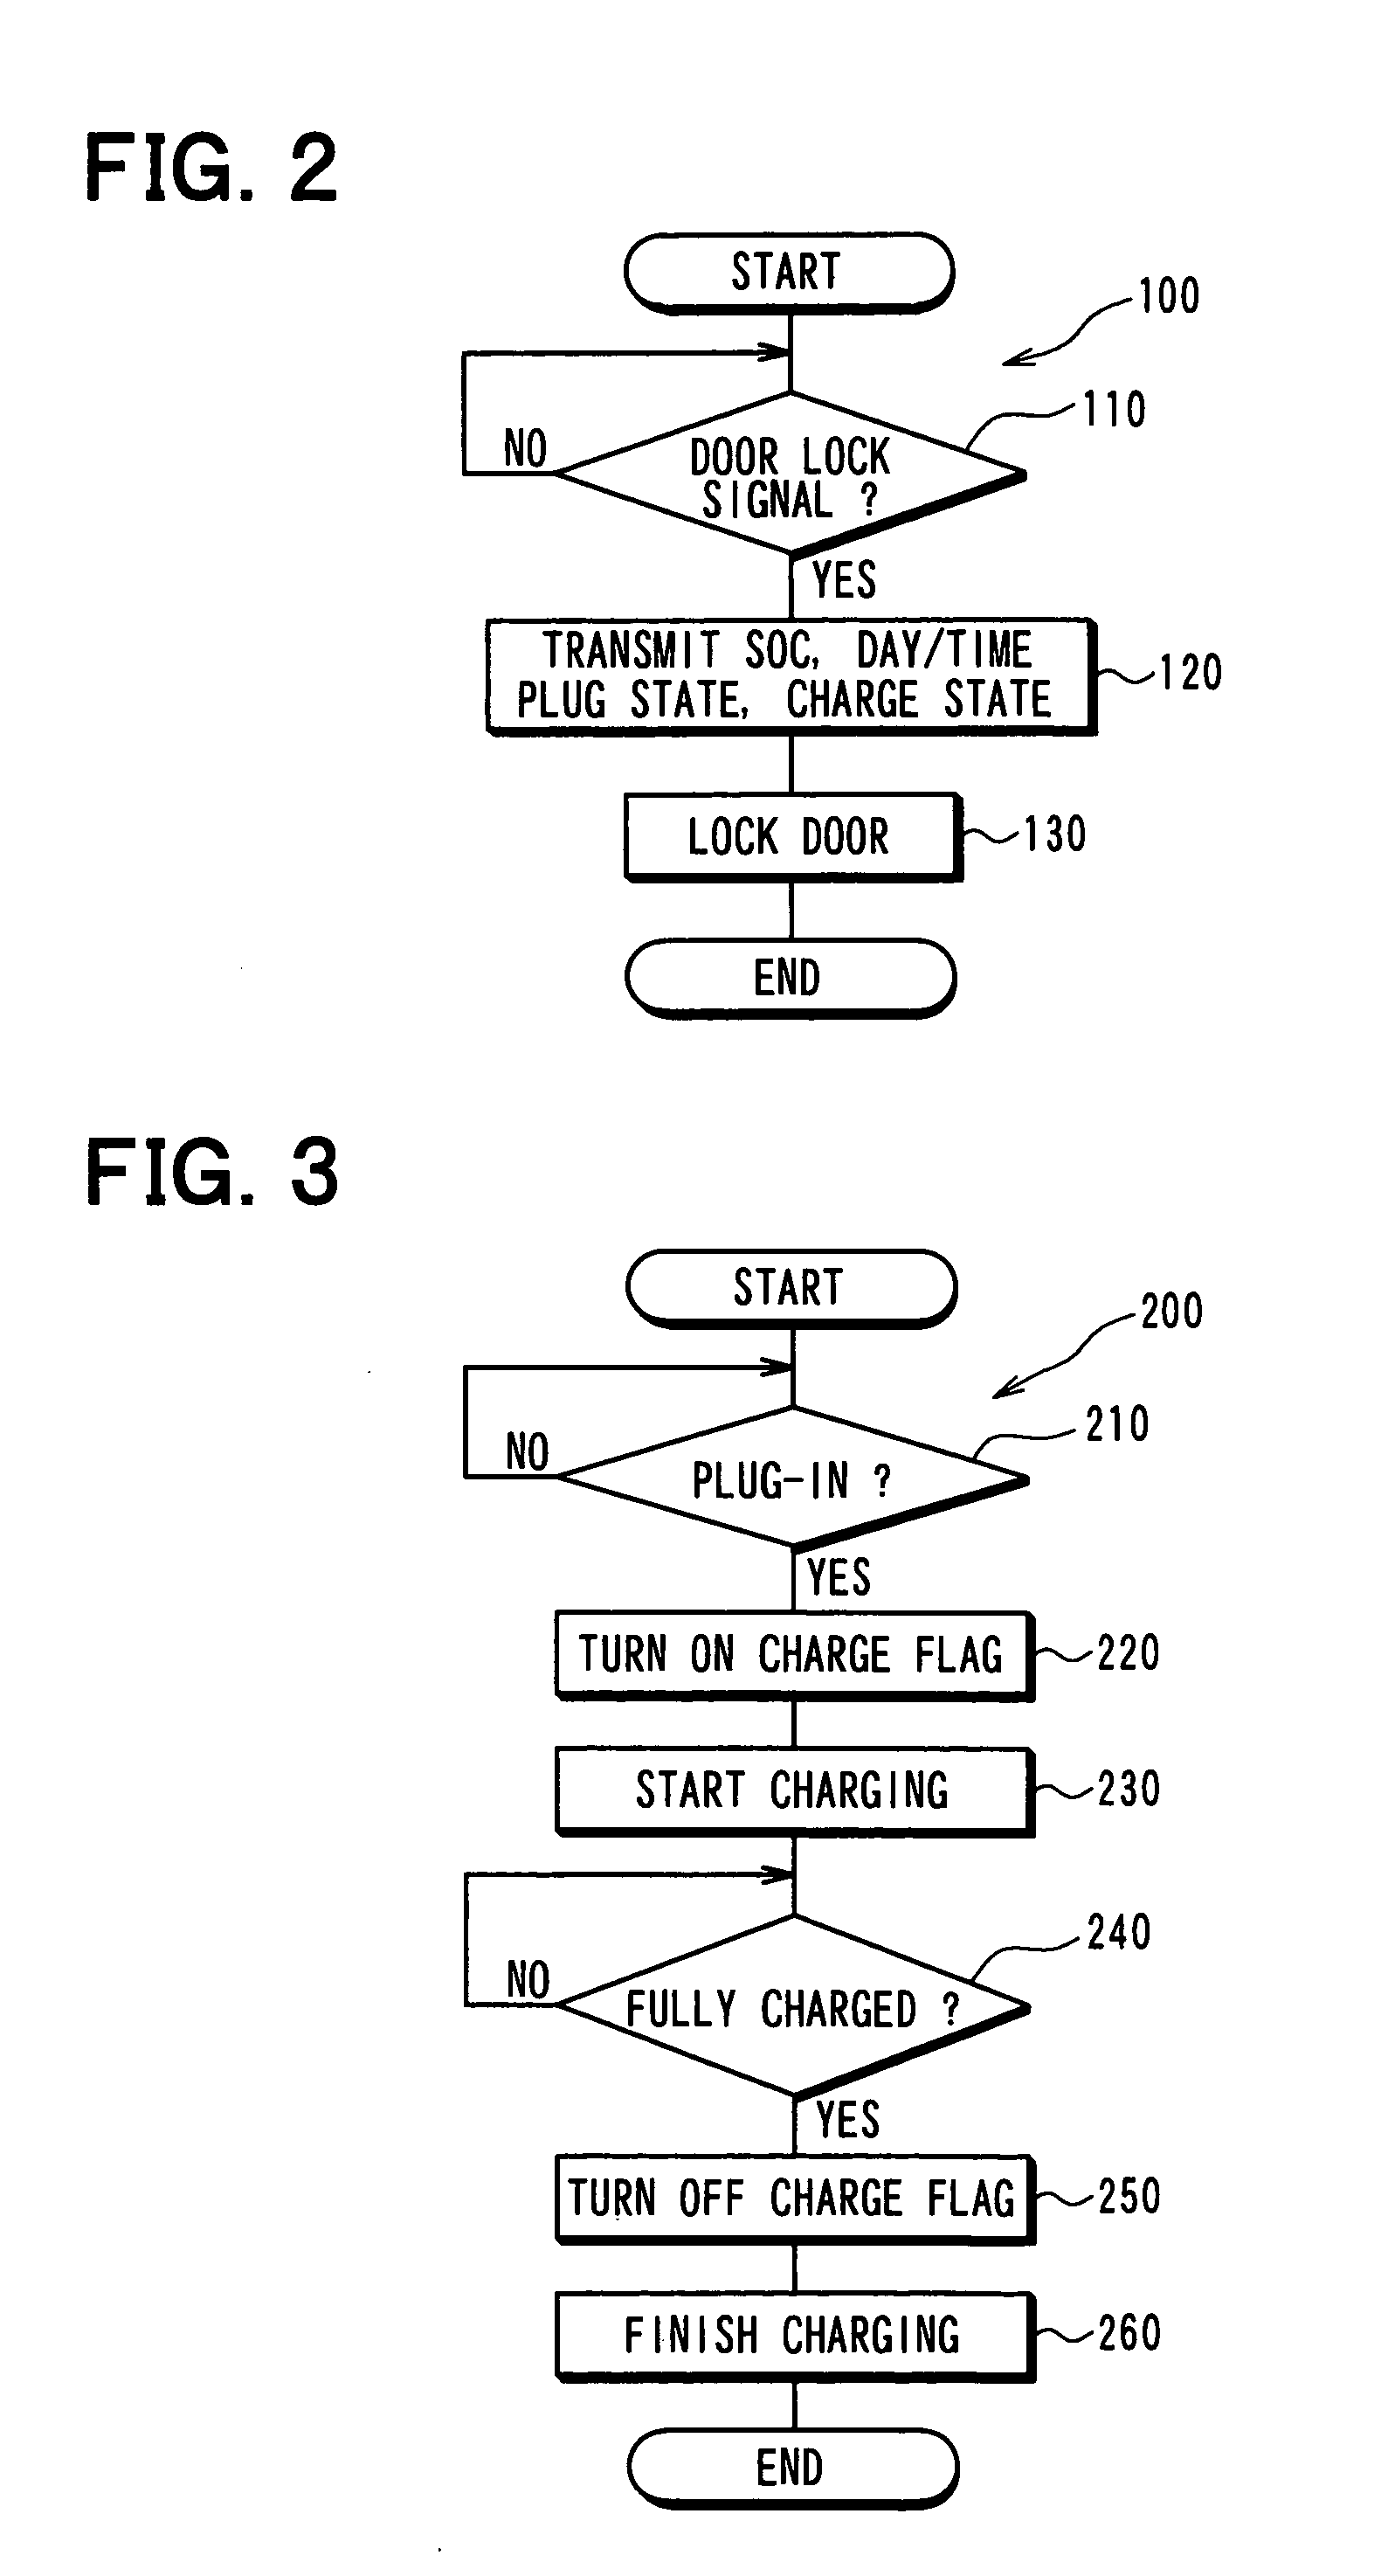 Door control and charge control for plug-in charge type vehicle